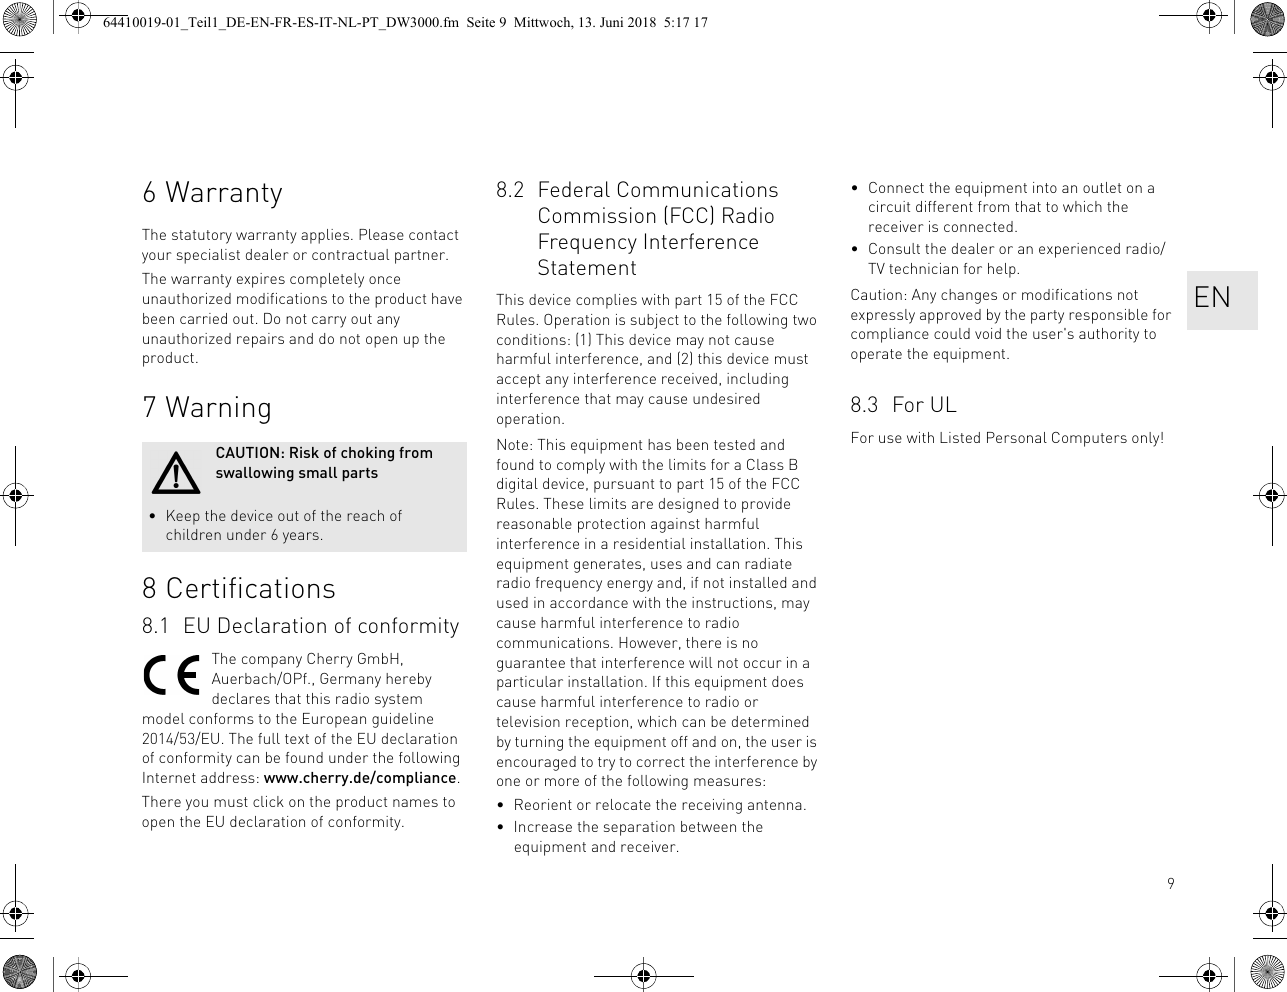 96WarrantyThe statutory warranty applies. Please contact your specialist dealer or contractual partner.The warranty expires completely once unauthorized modifications to the product have been carried out. Do not carry out any unauthorized repairs and do not open up the product.7Warning8 Certifications8.1 EU Declaration of conformityThe company Cherry GmbH, Auerbach/OPf., Germany hereby declares that this radio system model conforms to the European guideline 2014/53/EU. The full text of the EU declaration of conformity can be found under the following Internet address: www.cherry.de/compliance.There you must click on the product names to open the EU declaration of conformity.CAUTION: Risk of choking from swallowing small parts• Keep the device out of the reach of children under 6 years.8.2 Federal Communications Commission (FCC) Radio Frequency Interference StatementThis device complies with part 15 of the FCC Rules. Operation is subject to the following two conditions: (1) This device may not cause harmful interference, and (2) this device must accept any interference received, including interference that may cause undesired operation.Note: This equipment has been tested and found to comply with the limits for a Class B digital device, pursuant to part 15 of the FCC Rules. These limits are designed to provide reasonable protection against harmful interference in a residential installation. This equipment generates, uses and can radiate radio frequency energy and, if not installed and used in accordance with the instructions, may cause harmful interference to radio communications. However, there is no guarantee that interference will not occur in a particular installation. If this equipment does cause harmful interference to radio or television reception, which can be determined by turning the equipment off and on, the user is encouraged to try to correct the interference by one or more of the following measures:• Reorient or relocate the receiving antenna.• Increase the separation between the equipment and receiver.• Connect the equipment into an outlet on a circuit different from that to which the receiver is connected.• Consult the dealer or an experienced radio/TV technician for help.Caution: Any changes or modifications not expressly approved by the party responsible for compliance could void the user&apos;s authority to operate the equipment.8.3 For ULFor use with Listed Personal Computers only!EN64410019-01_Teil1_DE-EN-FR-ES-IT-NL-PT_DW3000.fm  Seite 9  Mittwoch, 13. Juni 2018  5:17 17